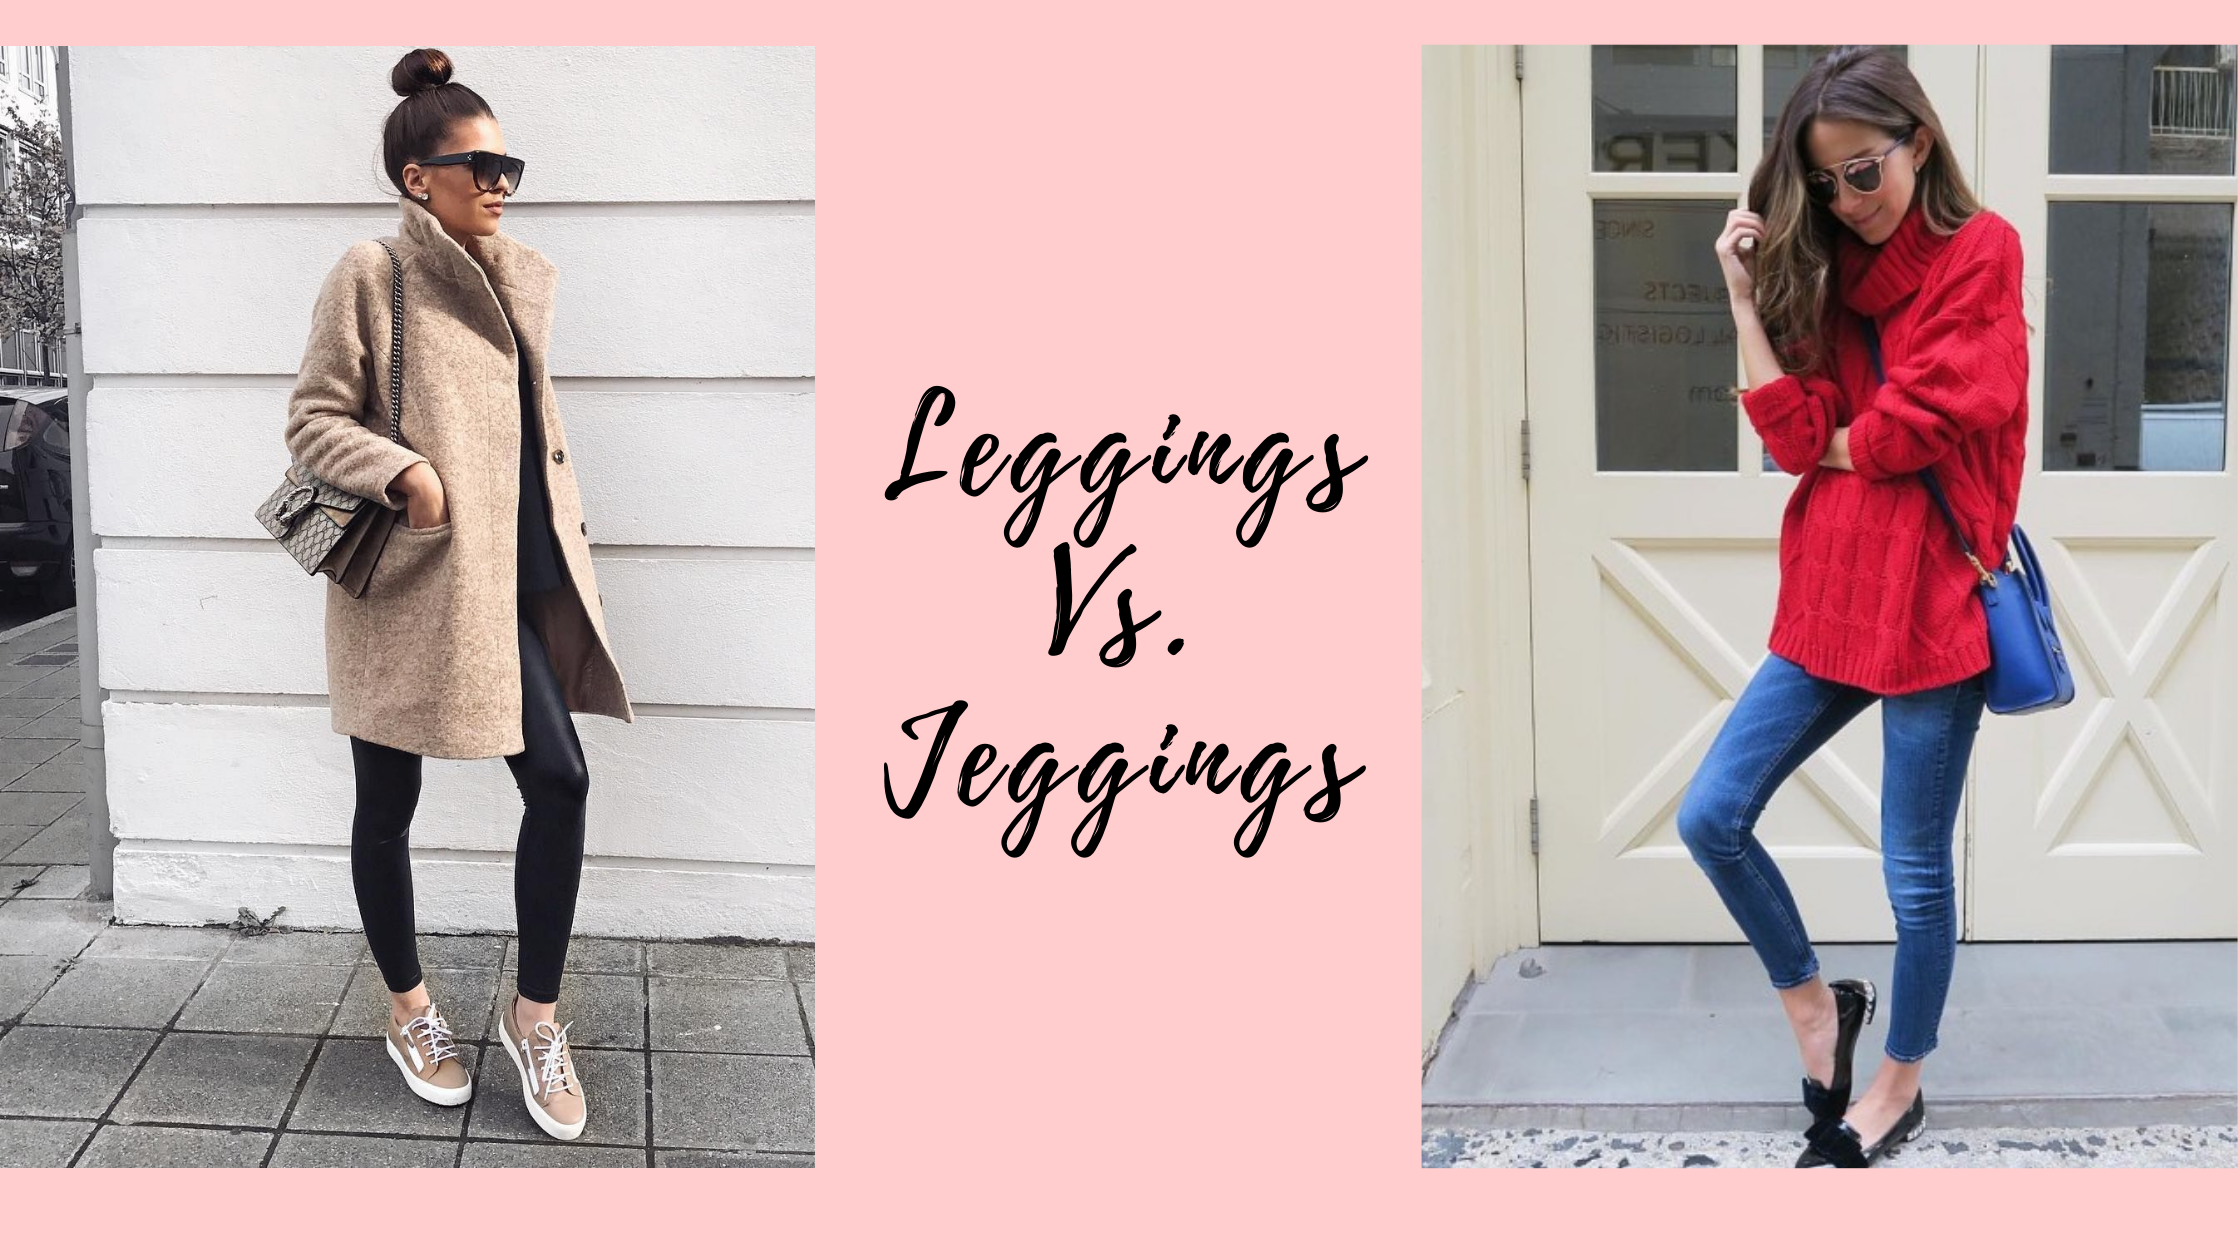 Leggings vs Jeggings: When to Opt for One Term Over Another